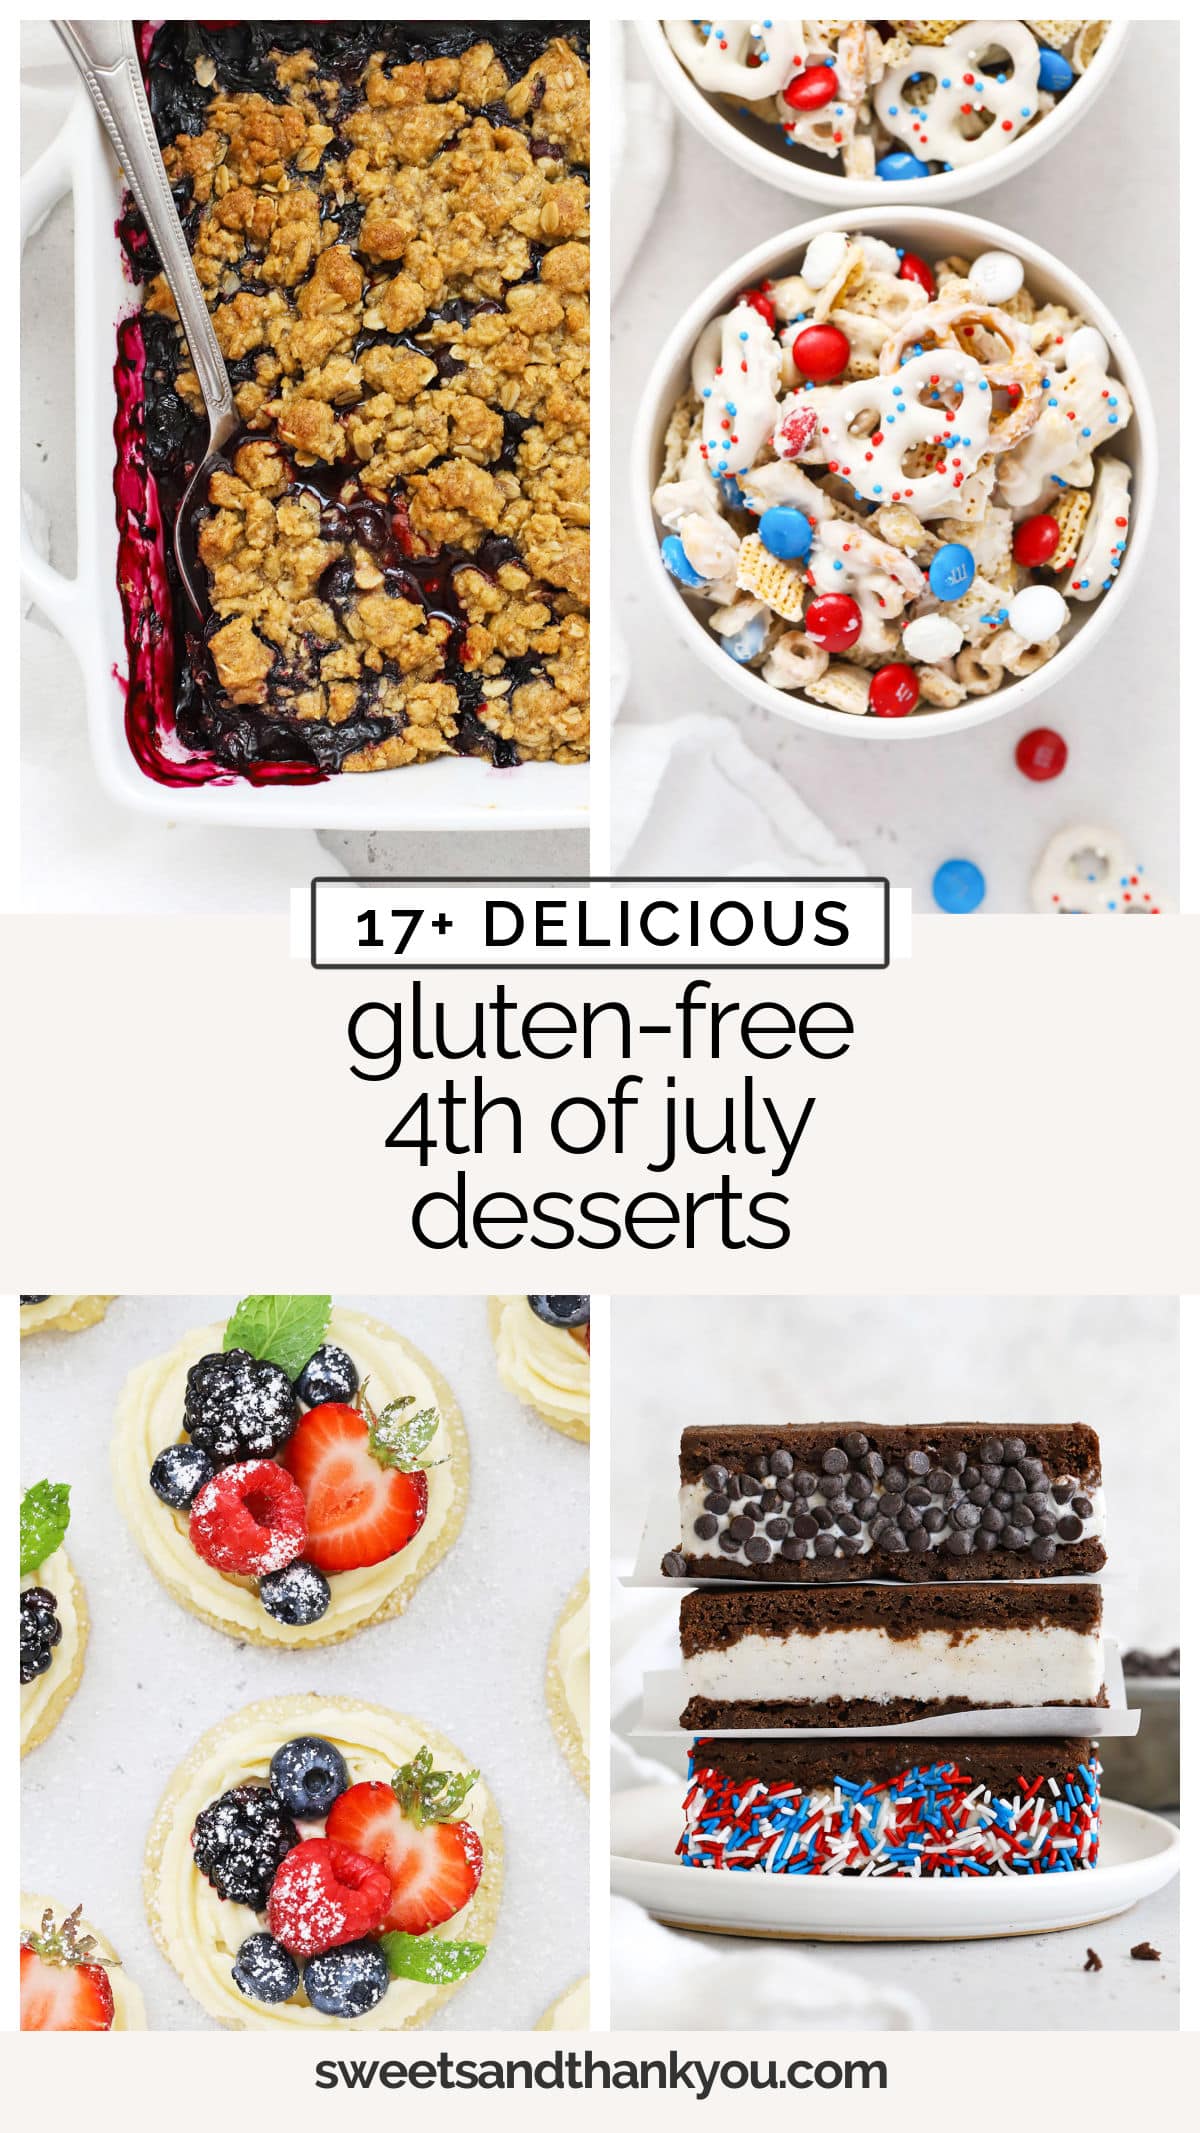 Gluten-Free 4th of July desserts to try this year! From red, white, and blue recipes to desserts for a crowd, we've got something for everyone this summer! / red white and blue gluten free desserts / gluten free desserts for 4th of july / gluten-free 4th of july dessert ideas / gluten-free 4th of july dessert recipes / gluten-free red white and blue dessert recipe / gluten-free summer desserts 